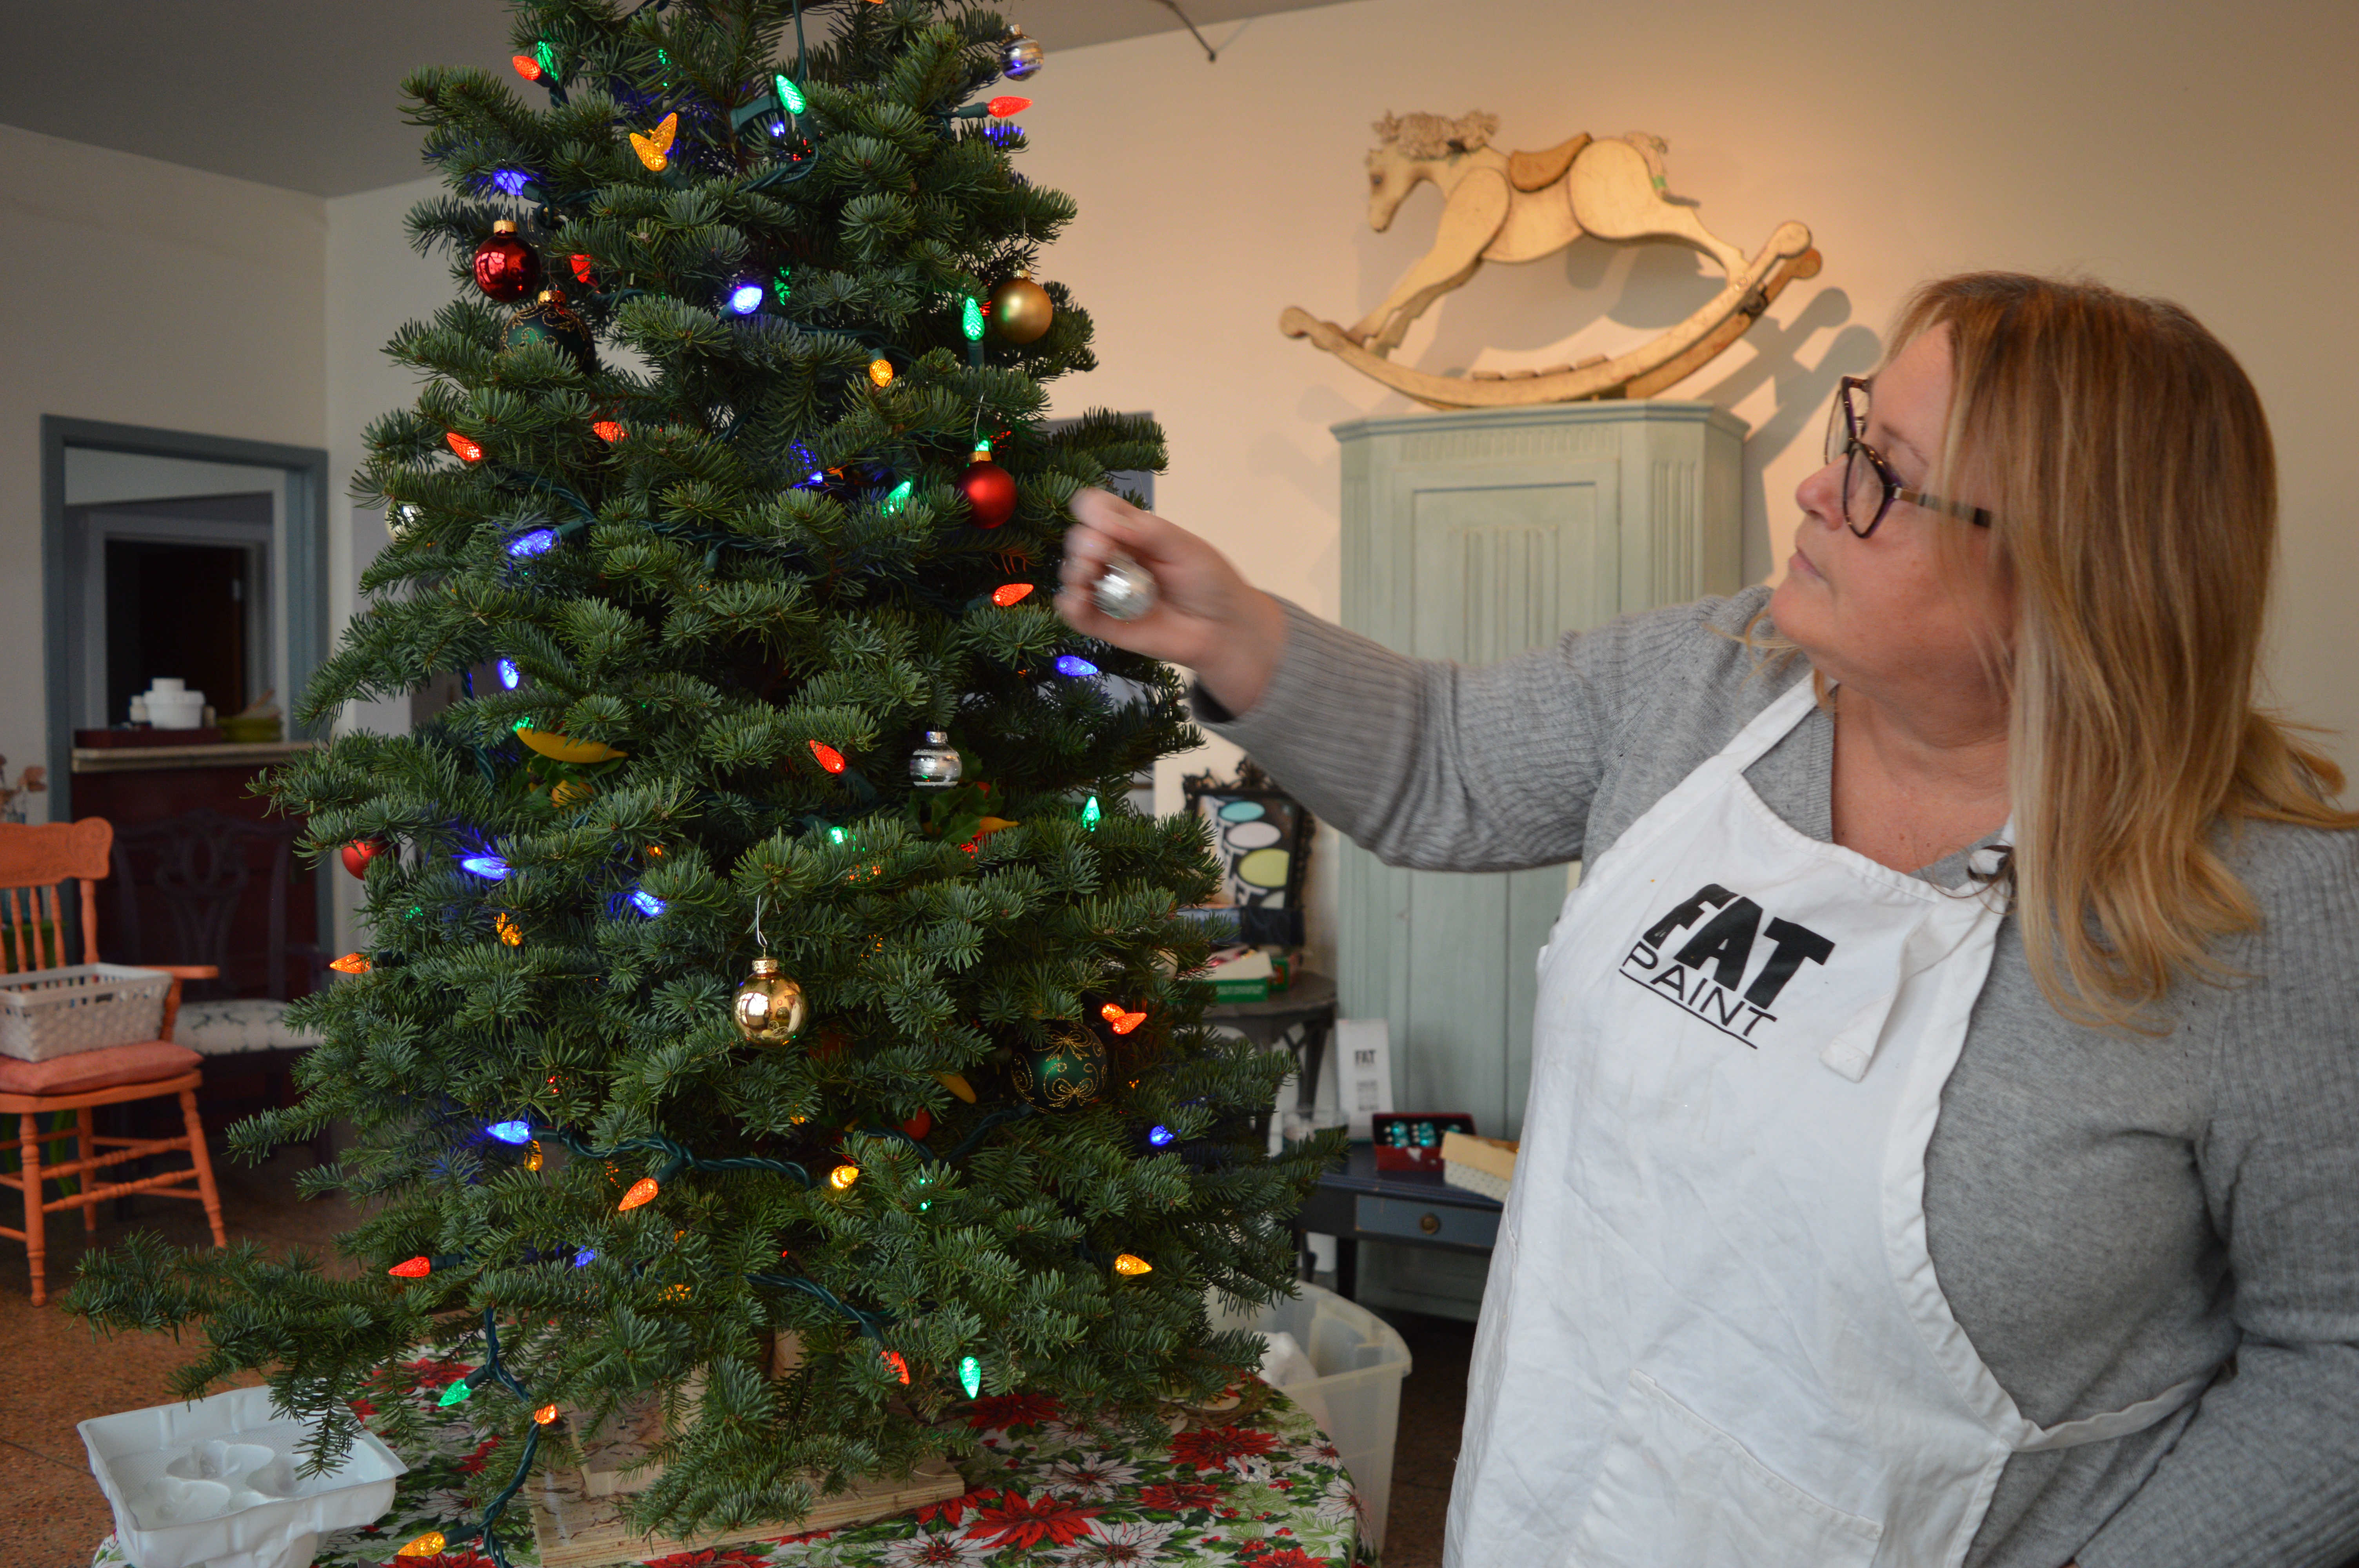 Victoria Lambert, co-owner of The FAT Paint Company, decorates a holiday tree in her shop.